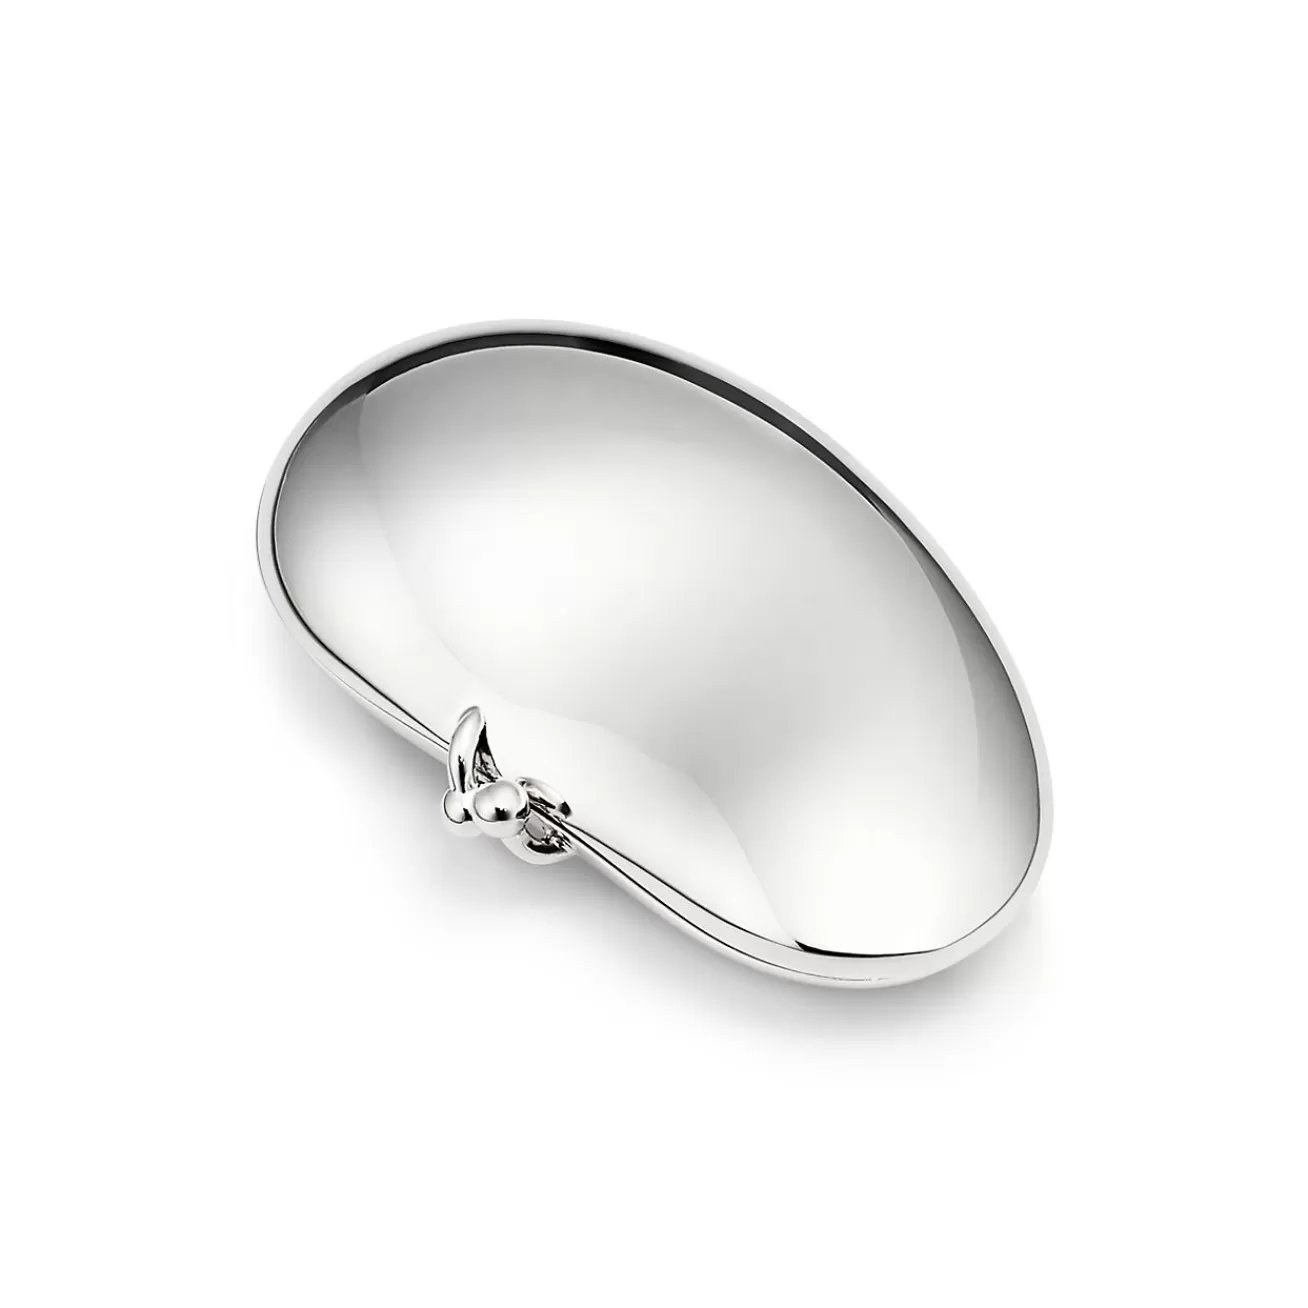 Tiffany & Co. Elsa Peretti® Bean® design Pillbox in Sterling Silver and Yellow Gold | ^ The Home | Housewarming Gifts